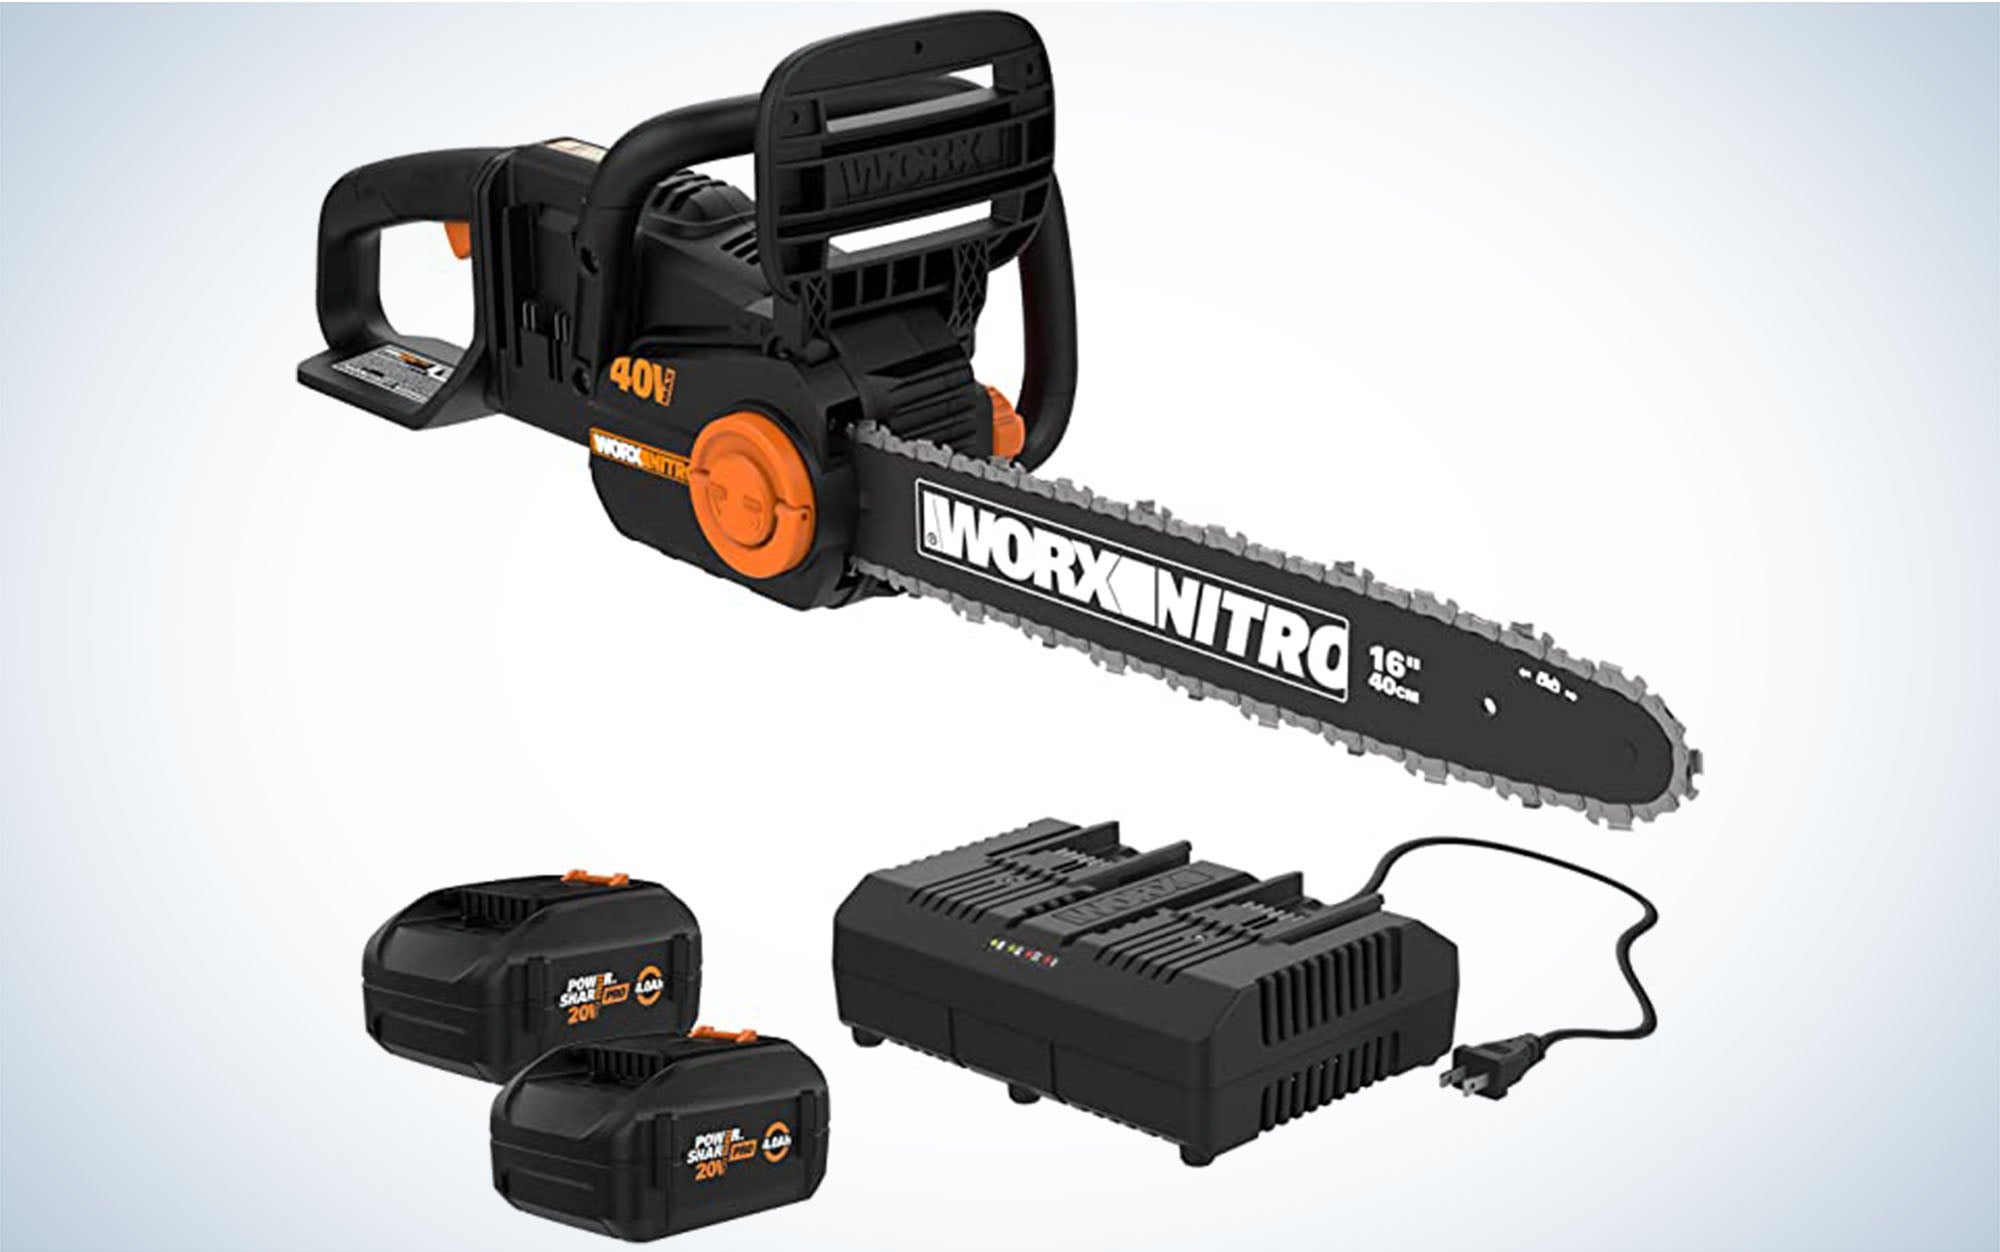 The Worx Nitro 40V Power Share is one of the best electric chainsaws.